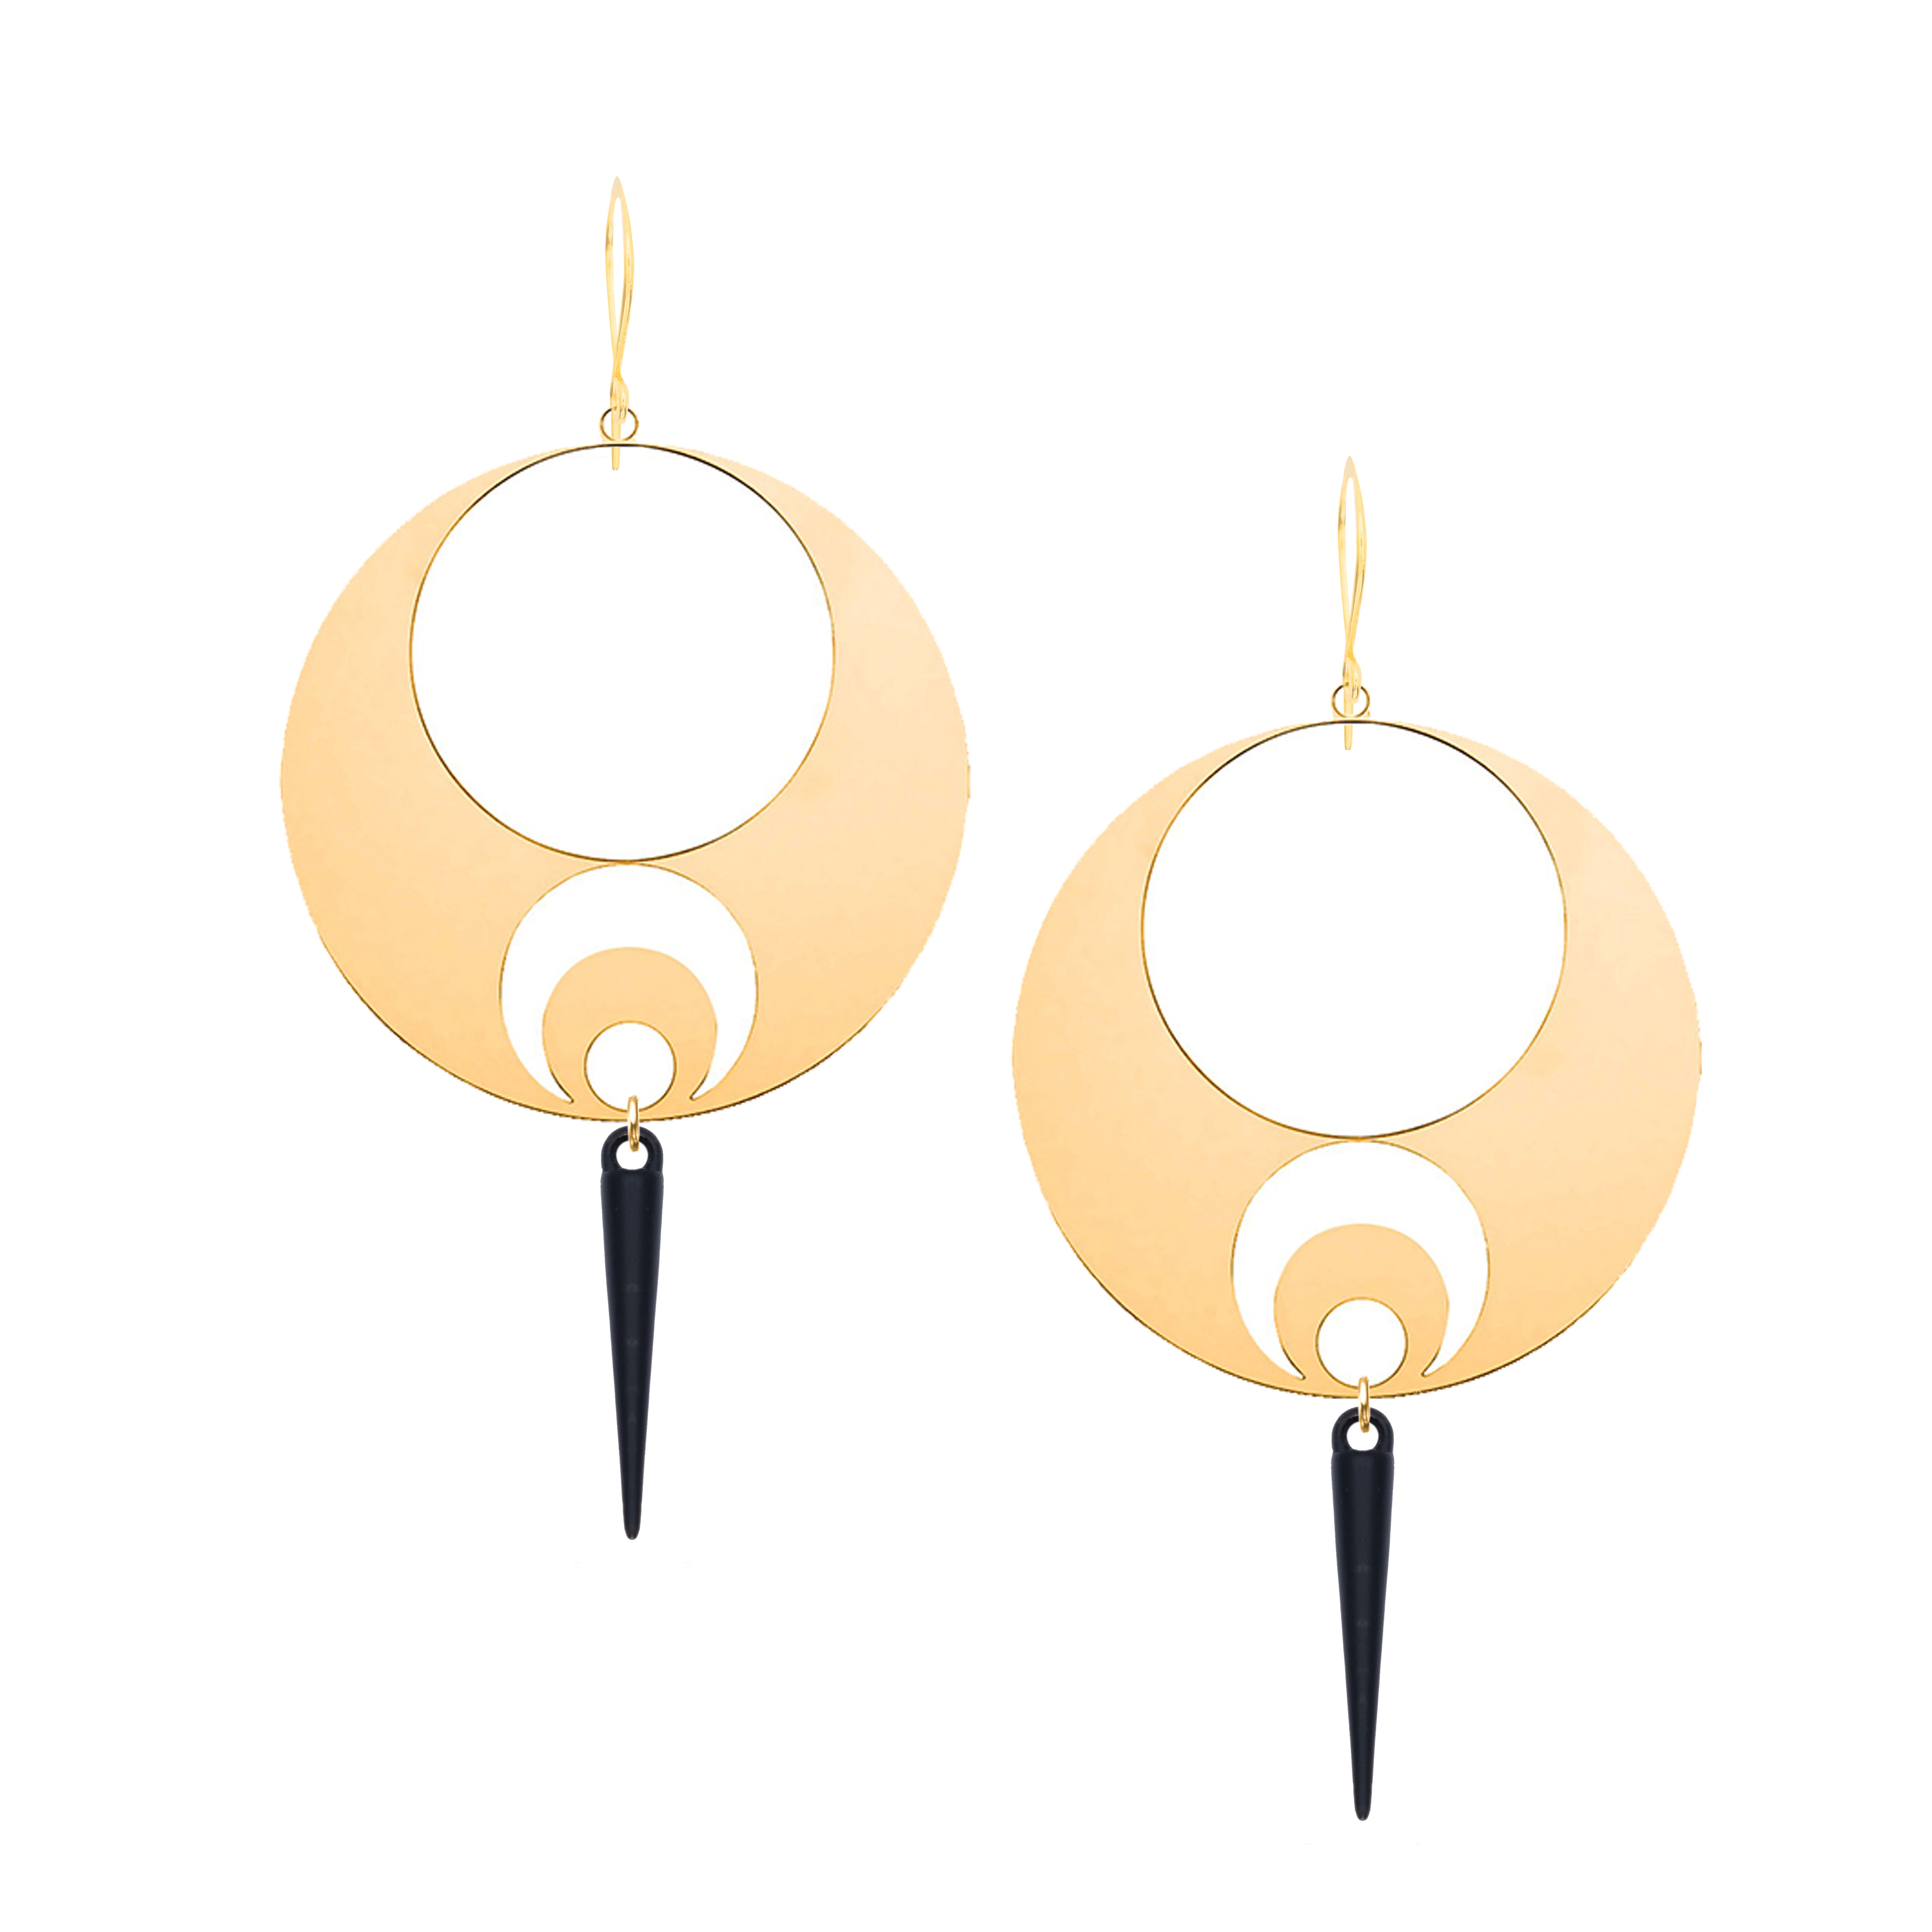 Gold Statement earrings with black spikes